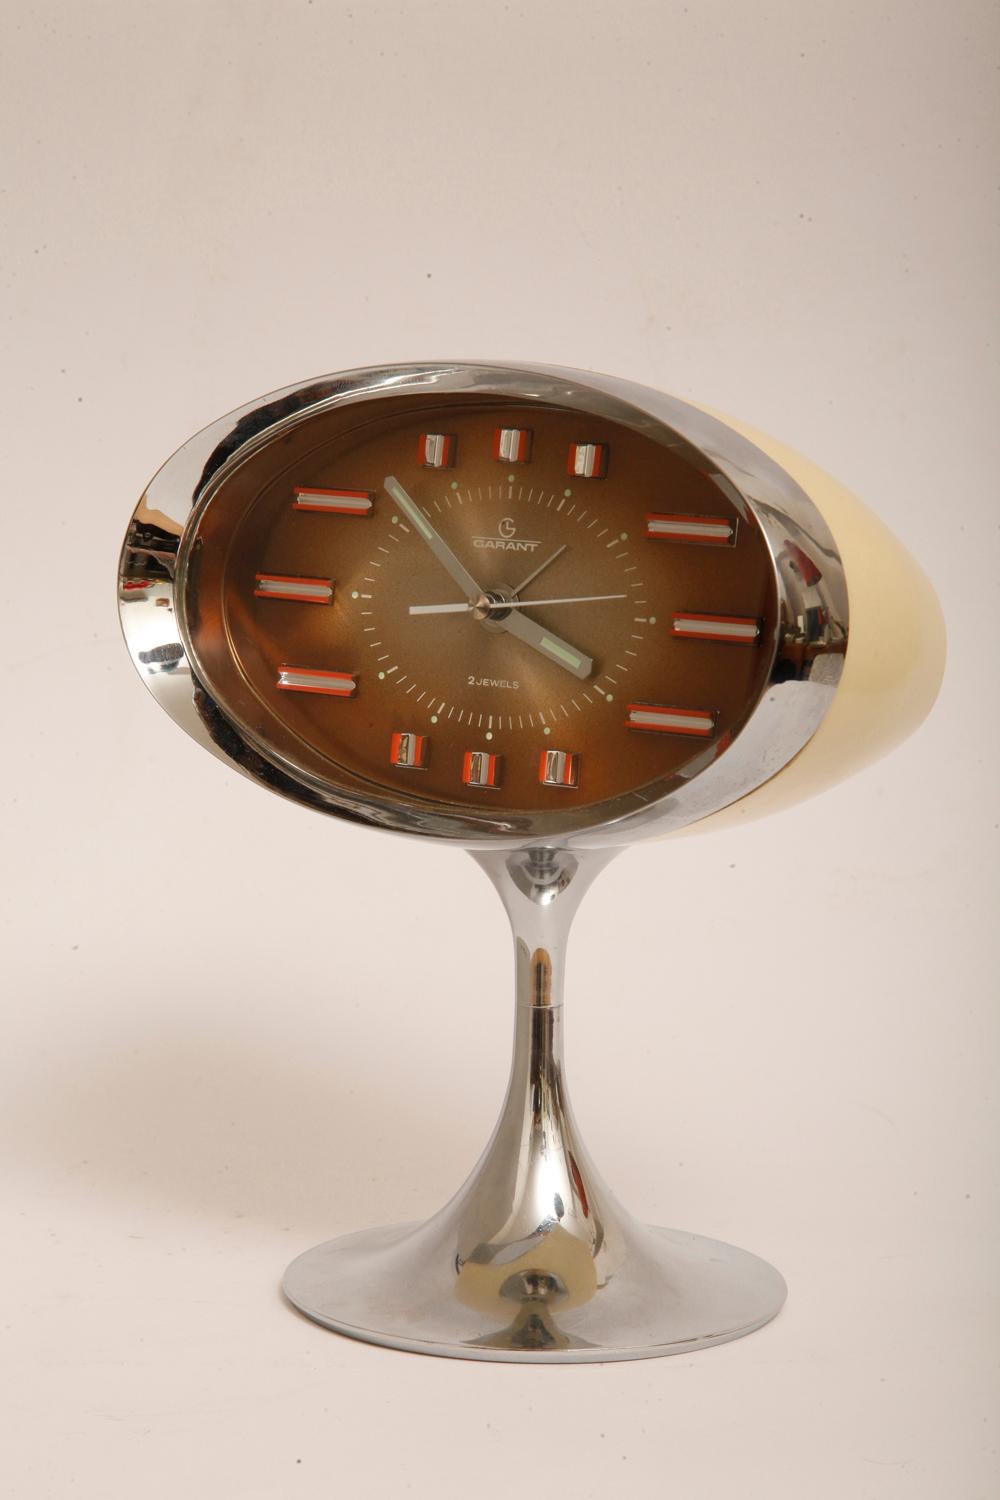 Japanese Space Age Alarm Clock Garant, Plastic and Chromed, 1970s For Sale 3